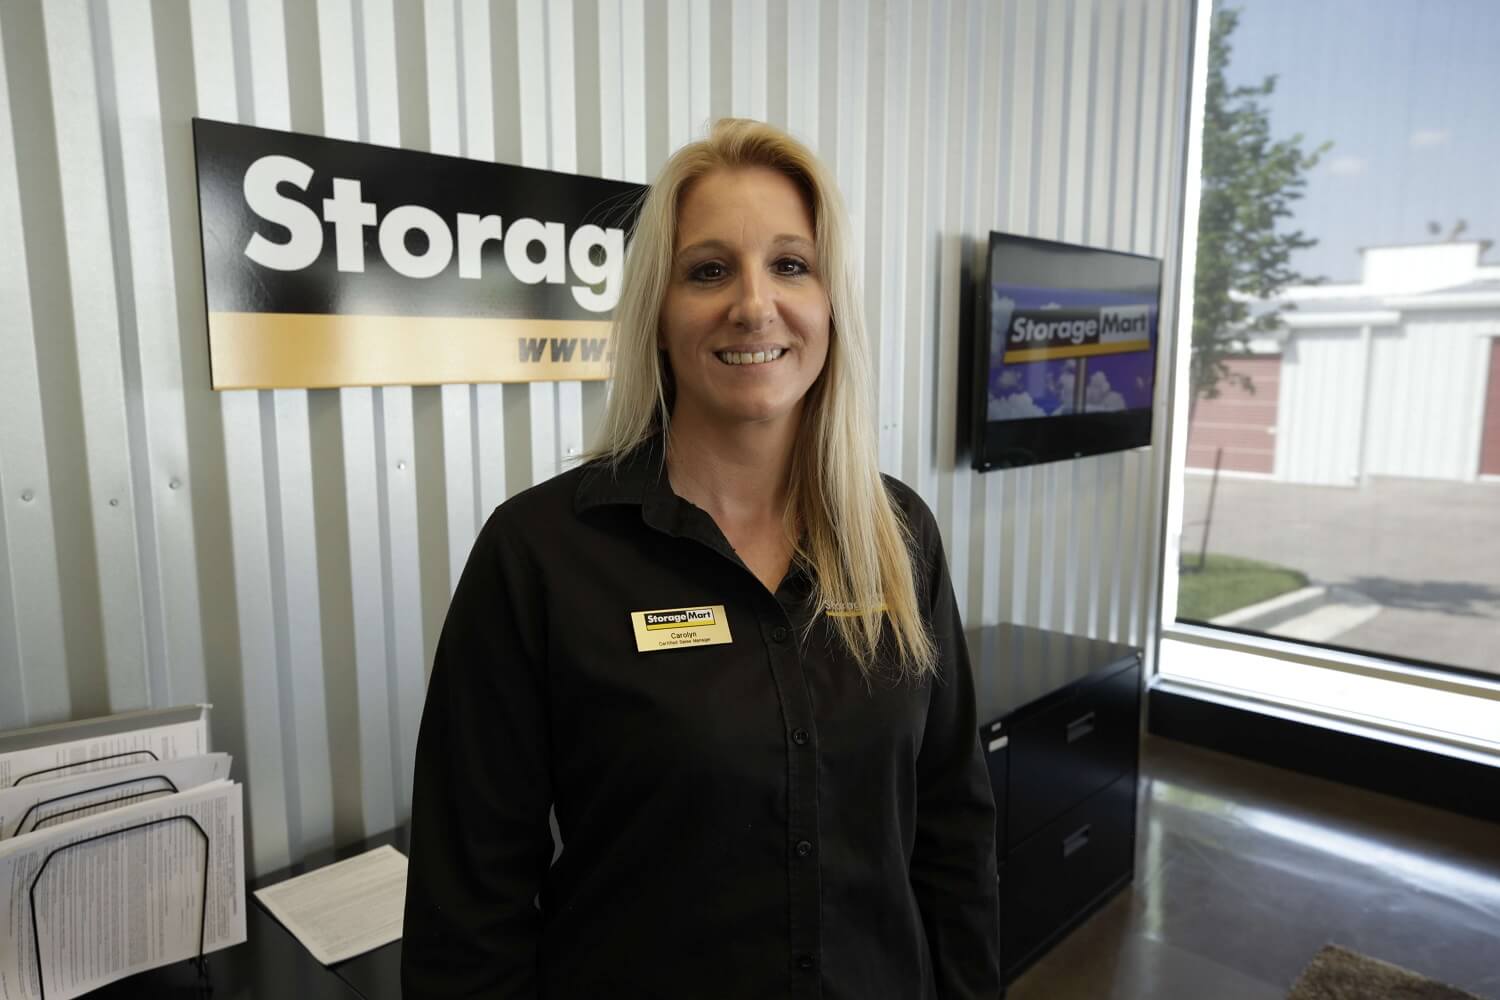 How StorageMart Provides a Mom and Pop Shop Feel